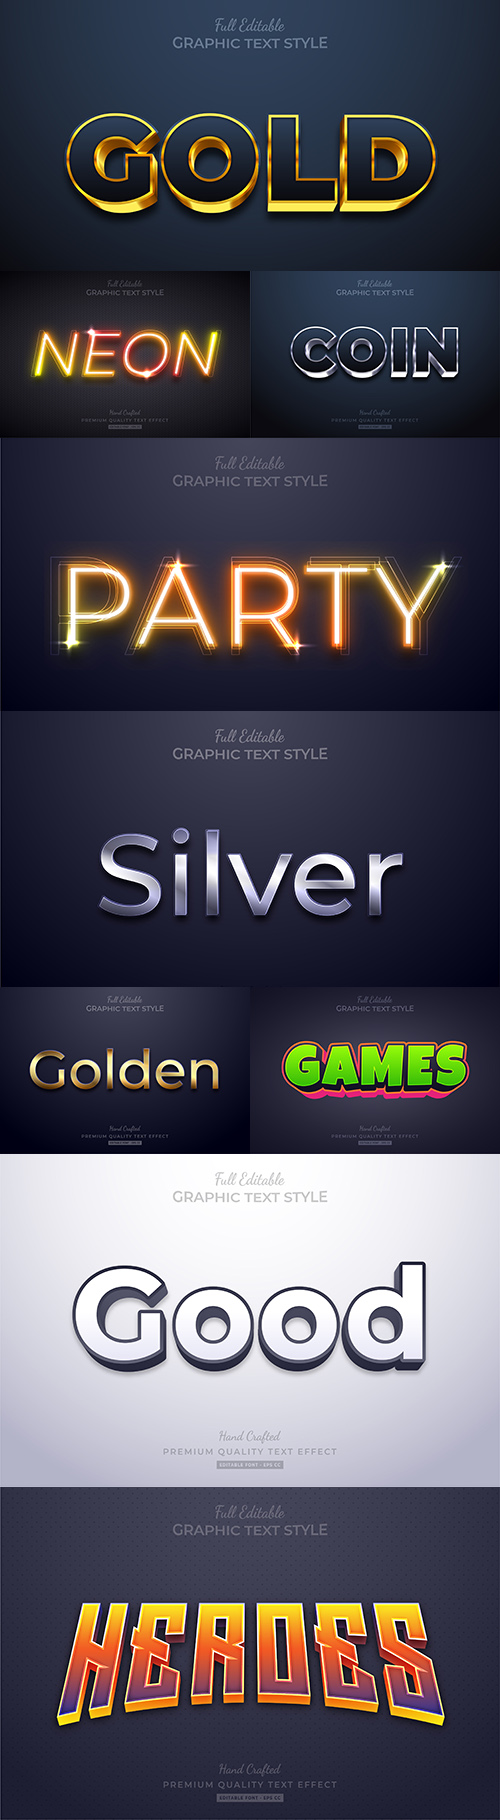 Editable font and 3d effect text design collection illustration 42